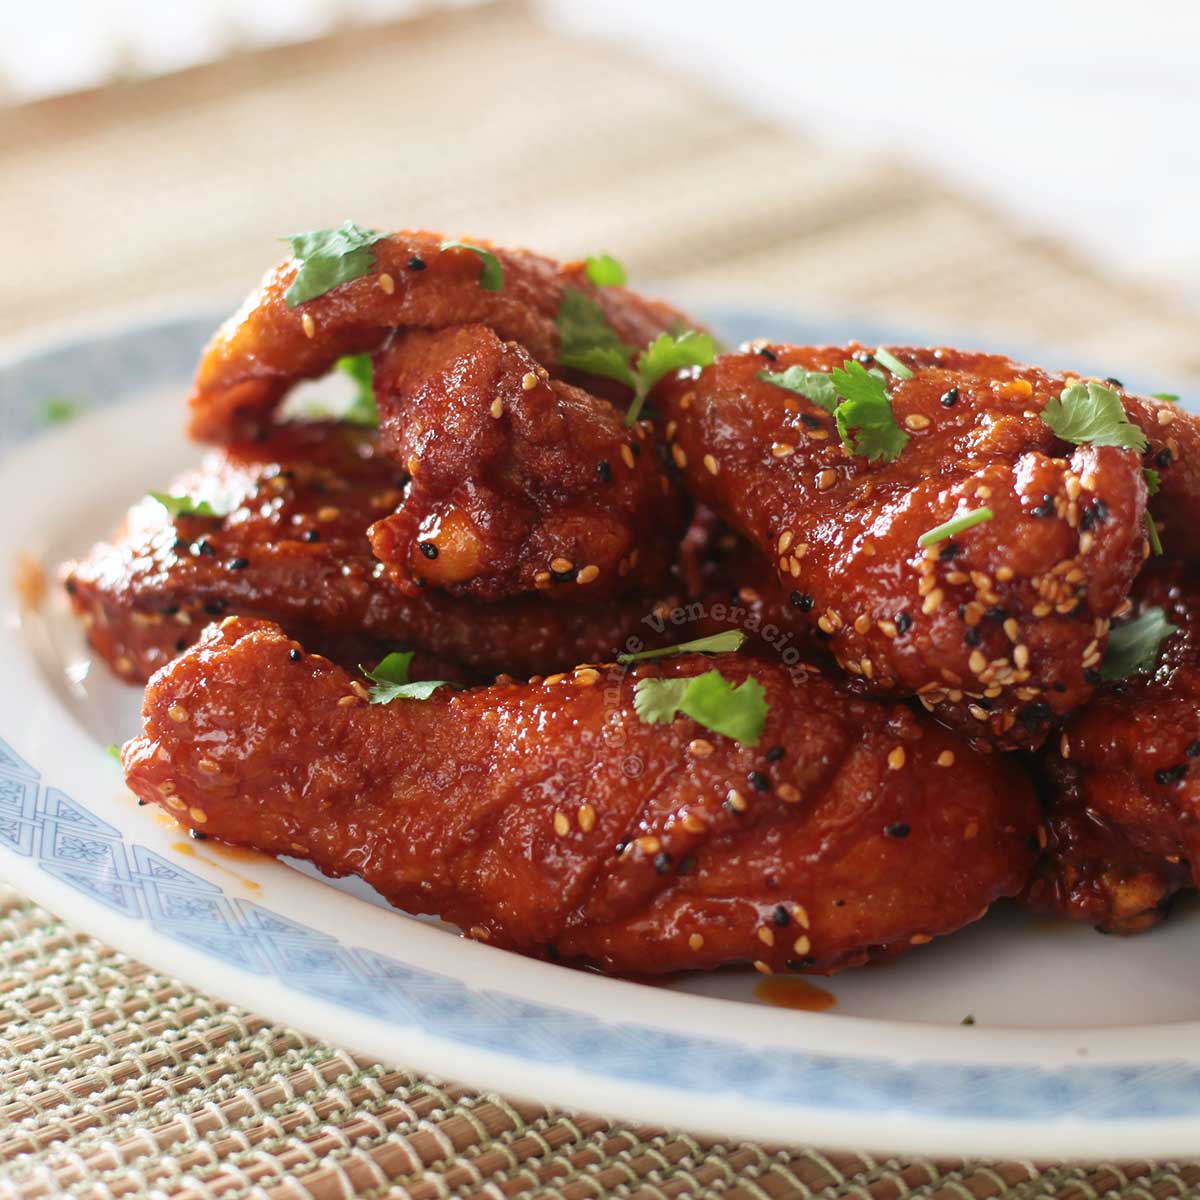 Fried chicken with chili honey sauce